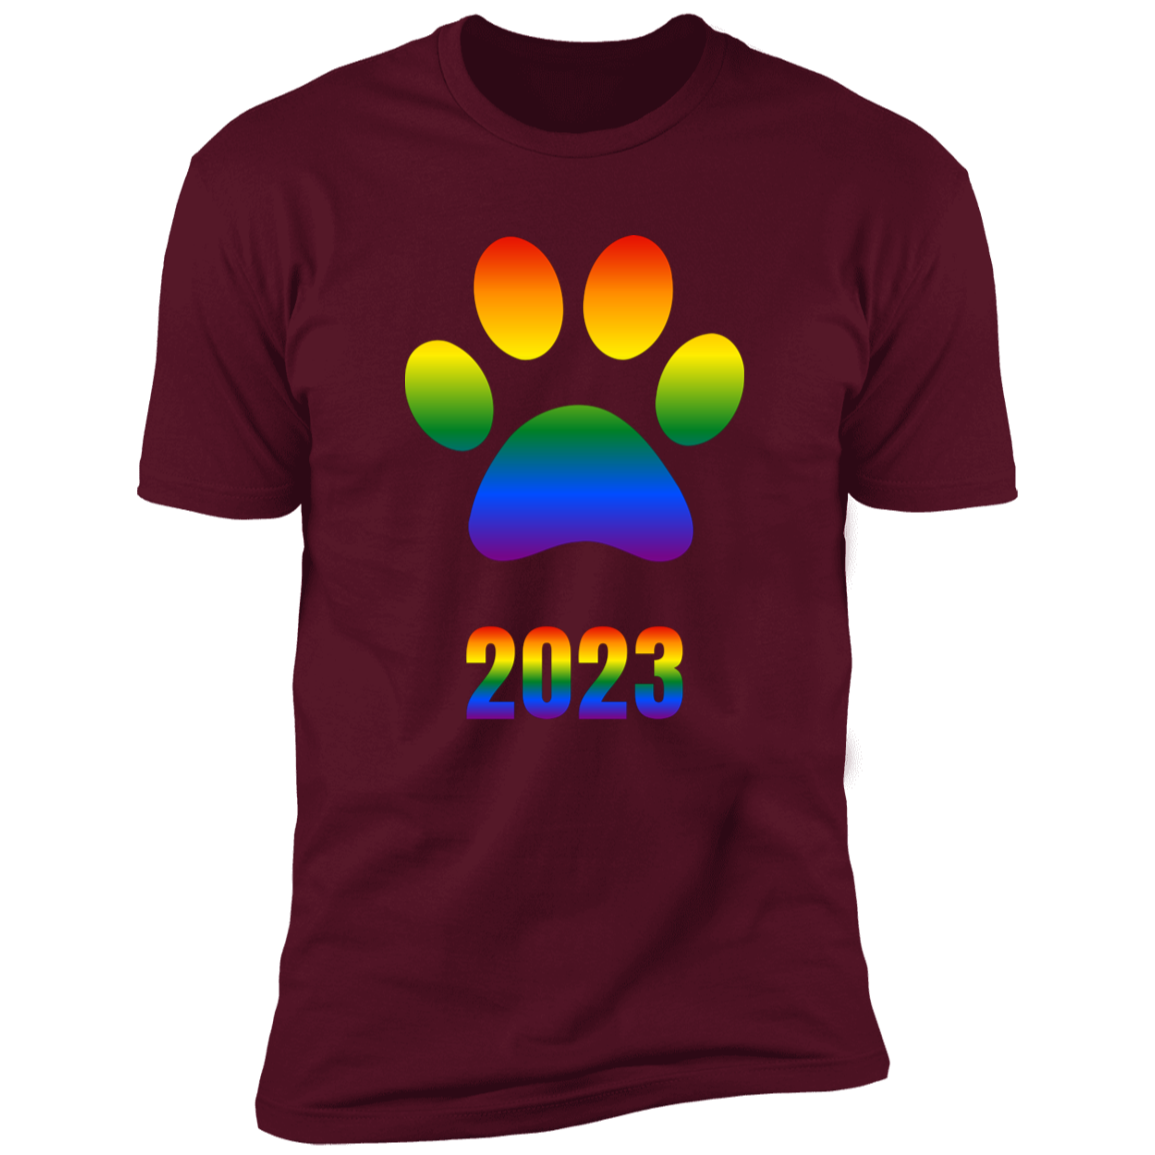 Dog Paw pride 2023 t-shirt, dog pride dog shirt for humans, in maroon